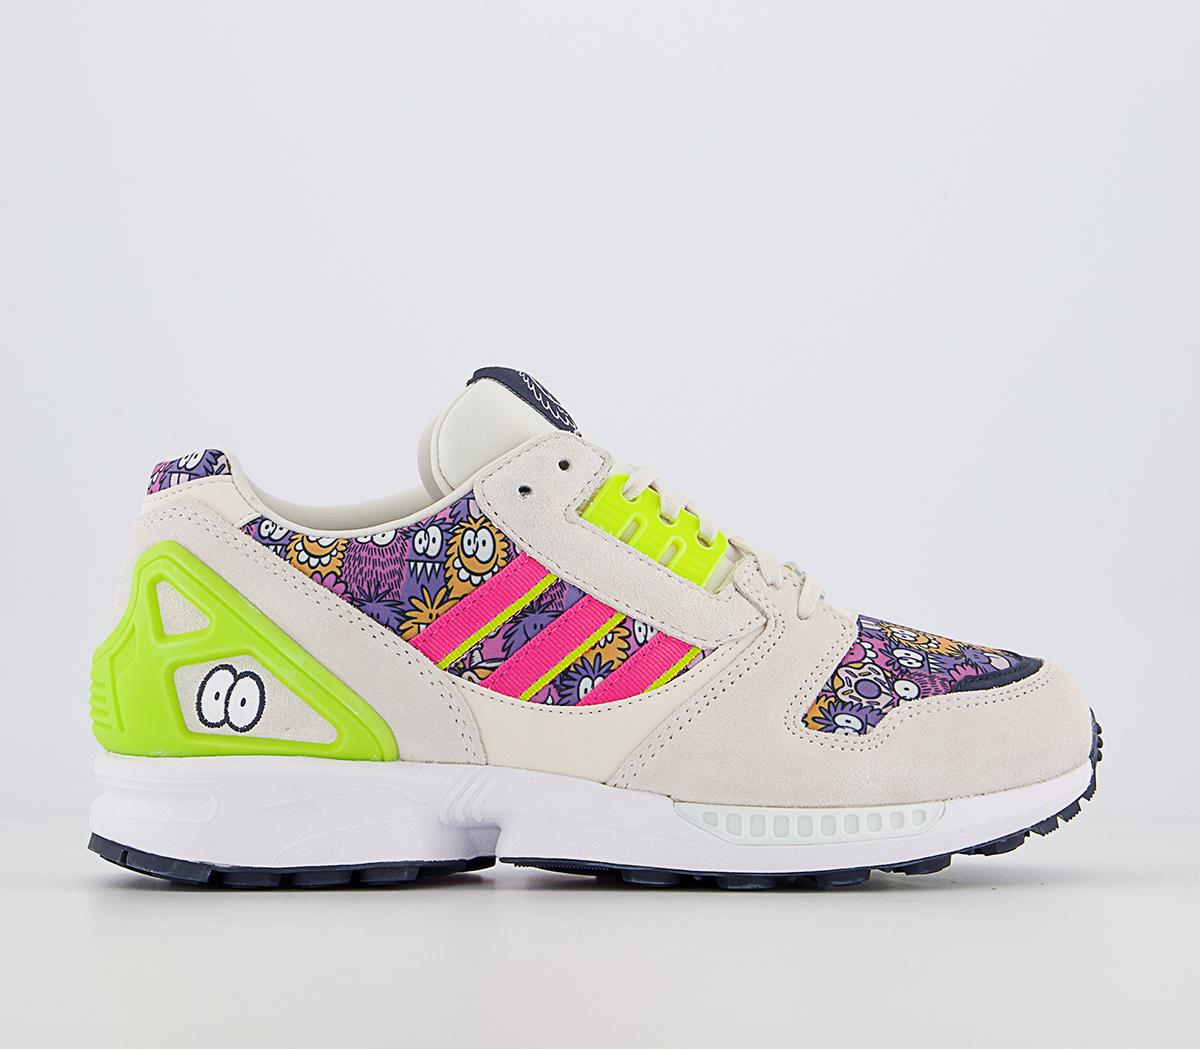 adidasZx8000 TrainersKevin Lyons